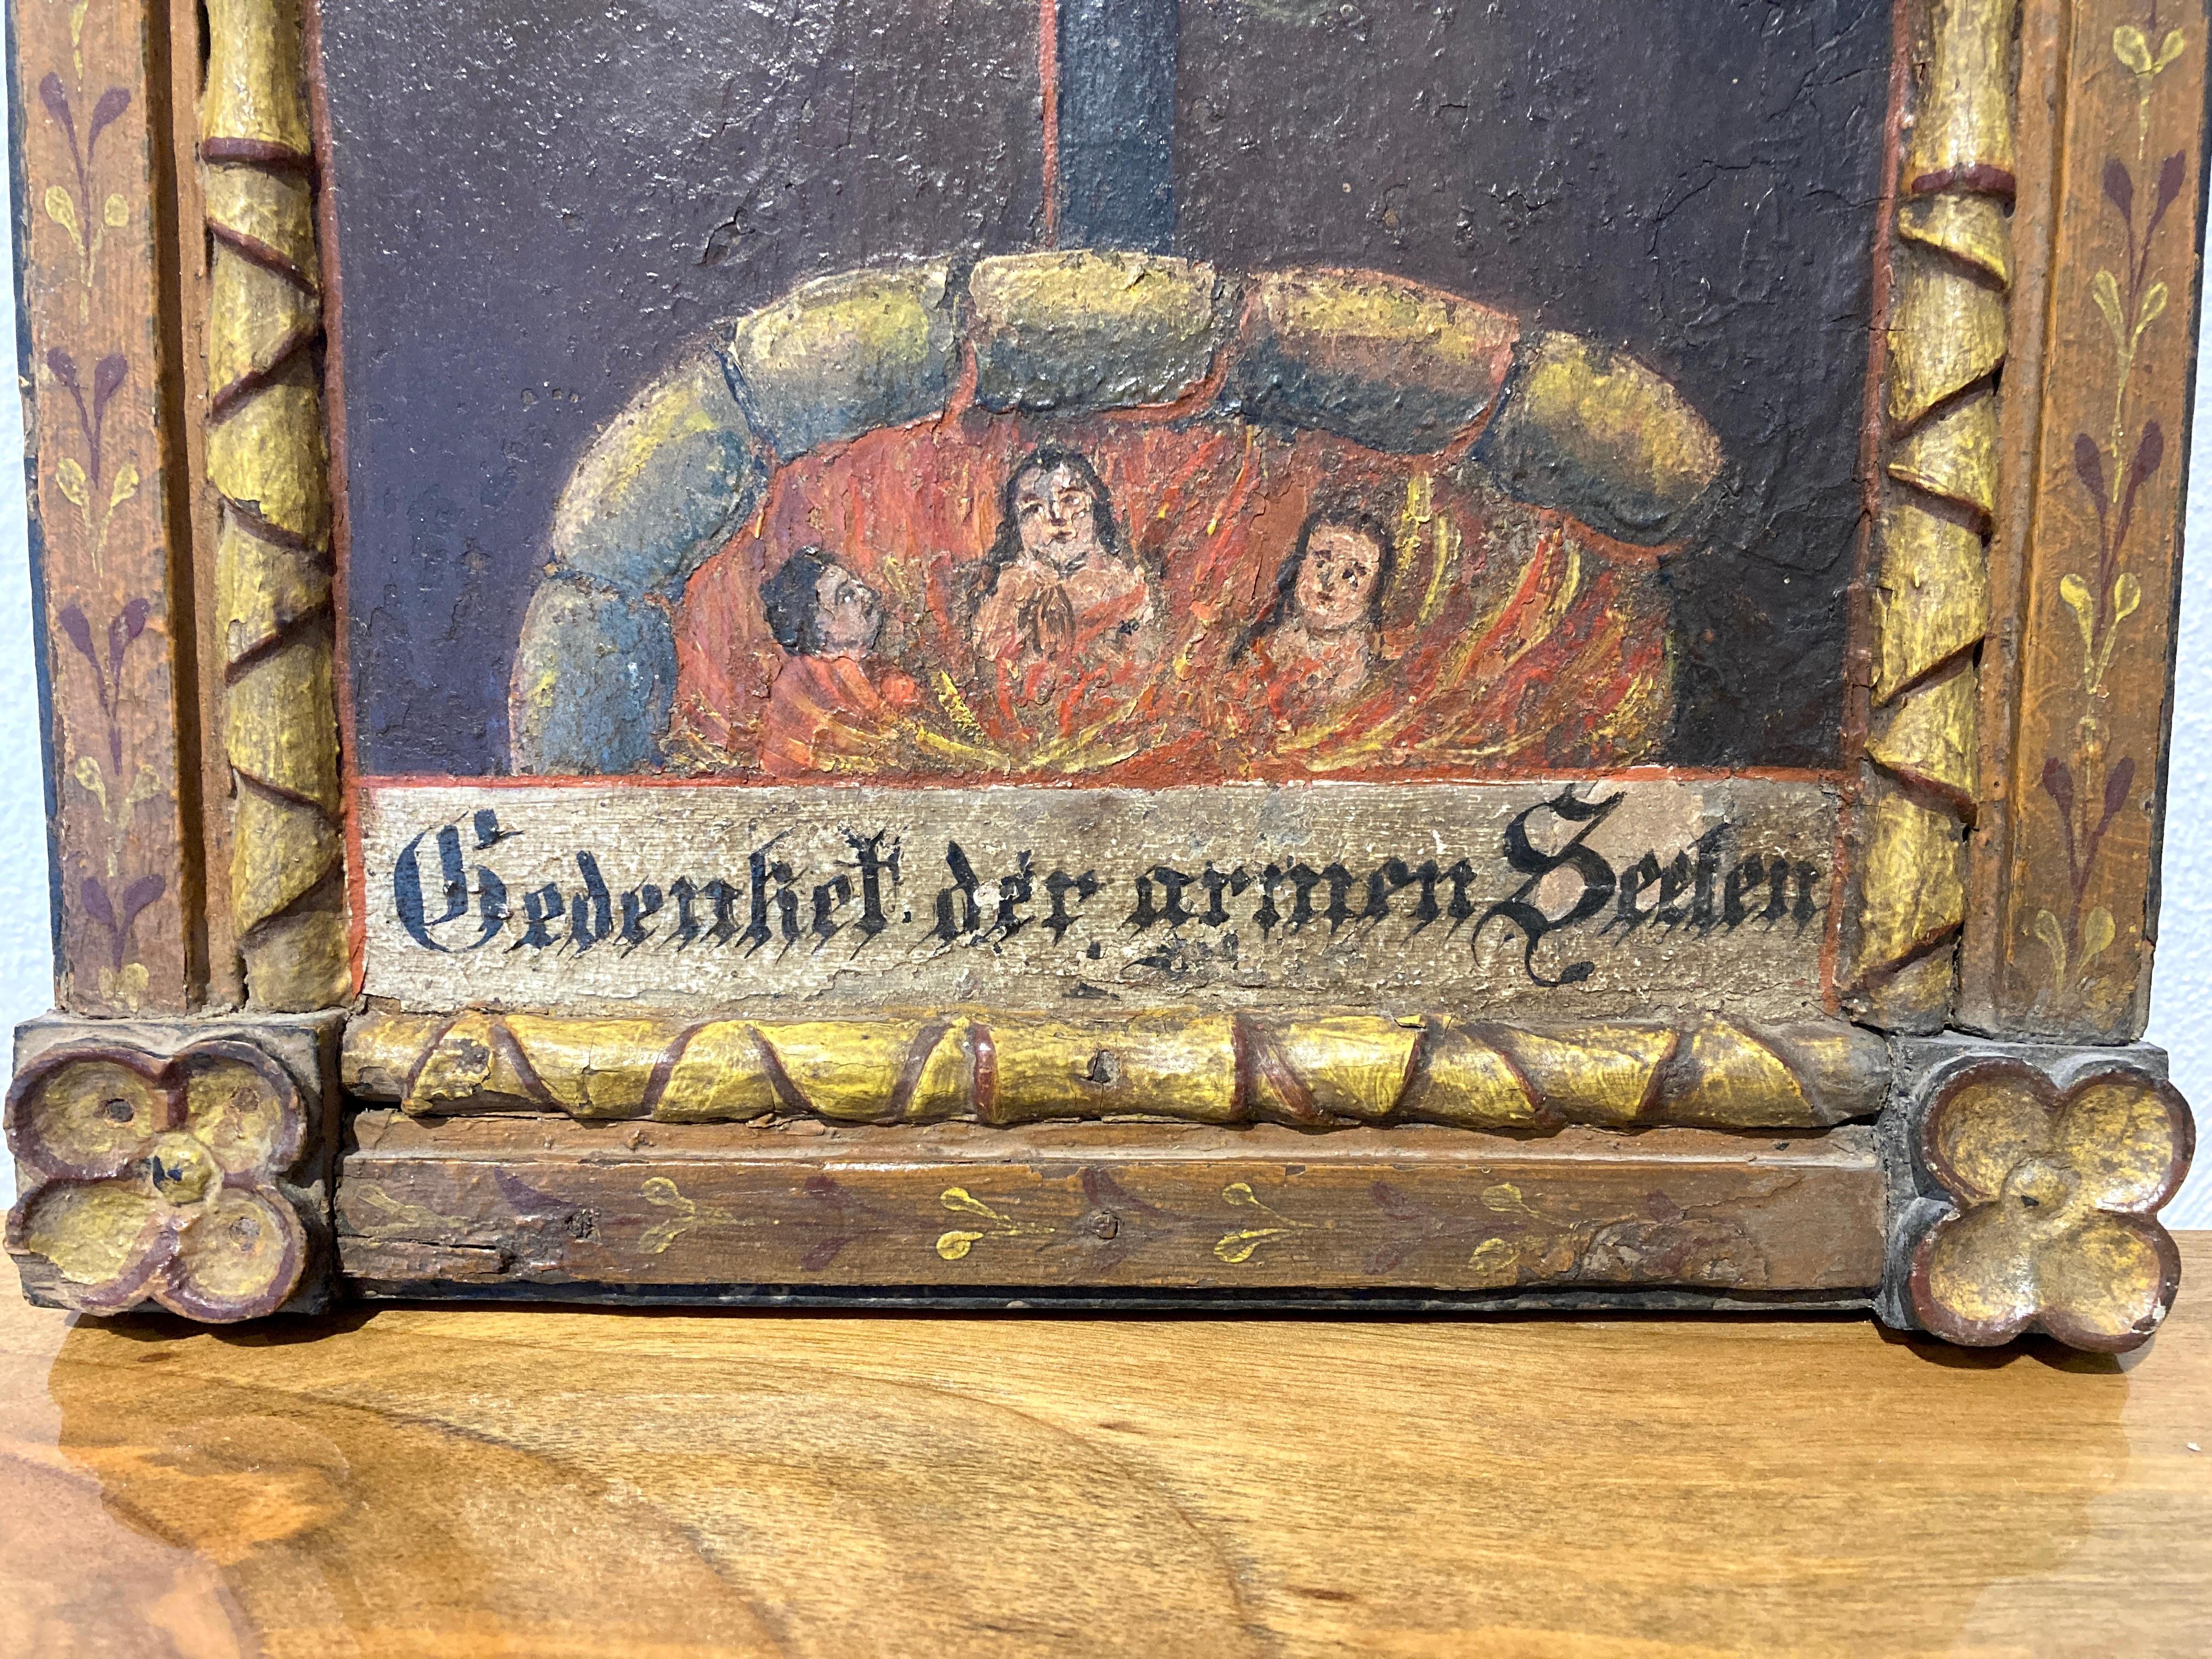 Bavarian Votiv Tablet early 19th century.
Jesus on the cross and poor souls in purgatory Oil in wood, early 19th century.
Very nice original condition with an elaborately carved frame